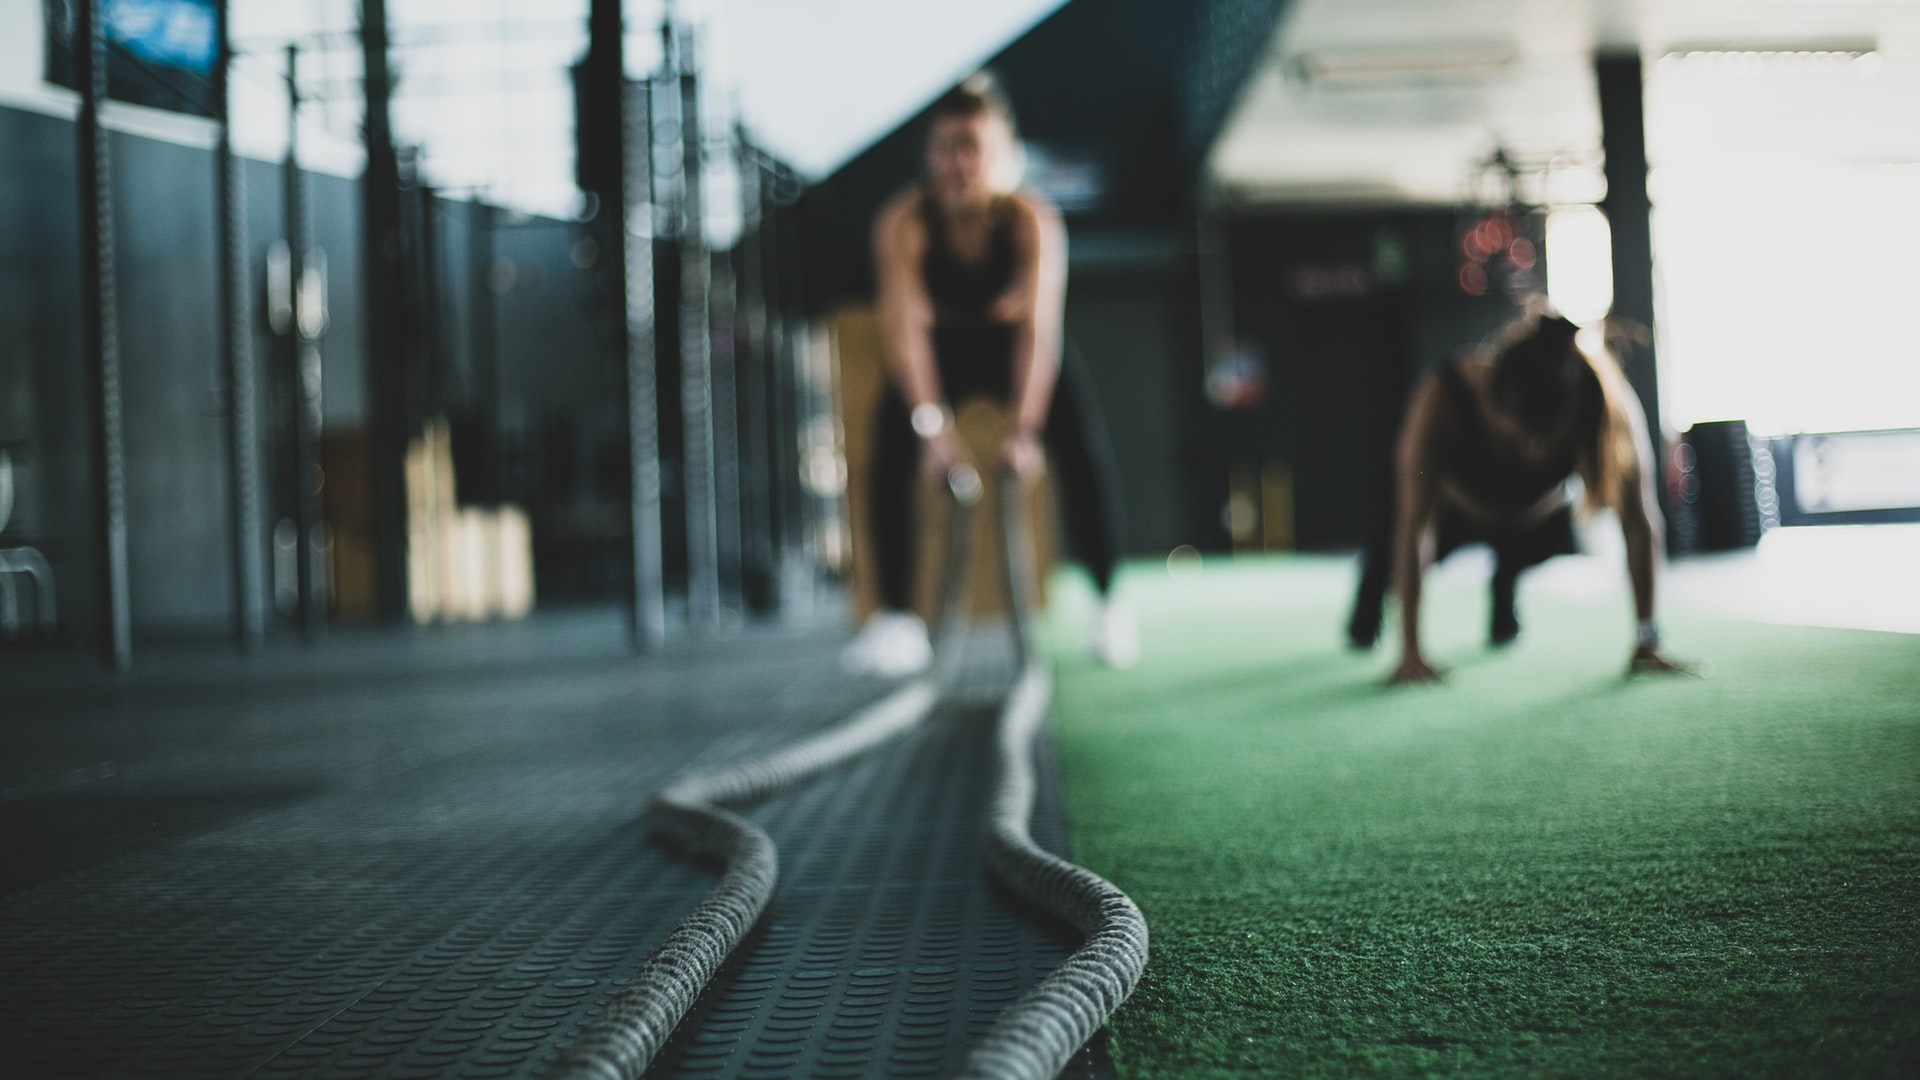 A man in a gym holding battle ropes in preparation to start exercising